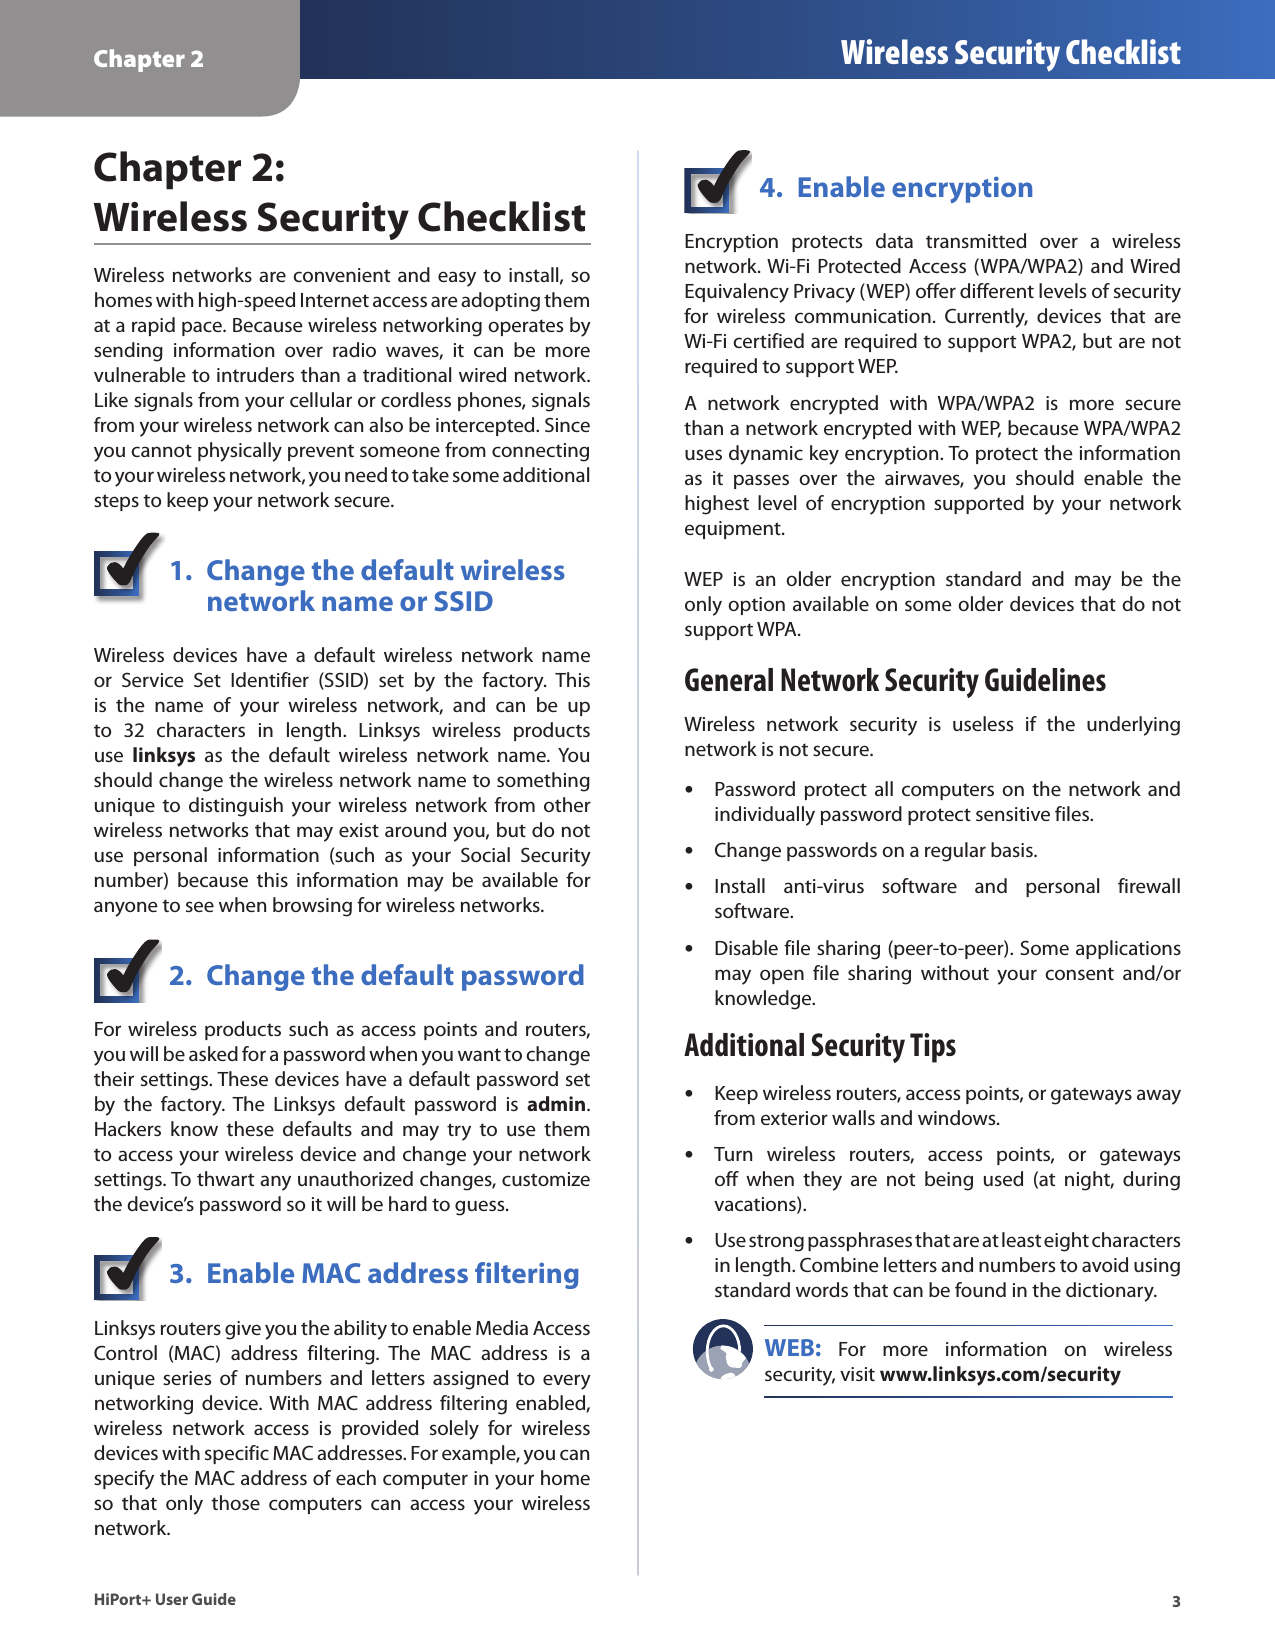 Chapter 2 Wireless Security Checklist3HiPort+ User GuideChapter 2:  Wireless Security ChecklistWireless networks are convenient and easy to install, so homes with high-speed Internet access are adopting them at a rapid pace. Because wireless networking operates by sending  information  over  radio  waves,  it  can  be  more vulnerable to intruders than a traditional wired network. Like signals from your cellular or cordless phones, signals from your wireless network can also be intercepted. Since you cannot physically prevent someone from connecting to your wireless network, you need to take some additional steps to keep your network secure. 1.  Change the default wireless    network name or SSIDWireless  devices  have  a  default  wireless  network  name or  Service  Set  Identifier  (SSID)  set  by  the  factory.  This is  the  name  of  your  wireless  network,  and  can  be  up to  32  characters  in  length.  Linksys  wireless  products use  linksys  as  the  default  wireless  network  name.  You should change the wireless network name to something unique  to  distinguish  your  wireless  network from  other wireless networks that may exist around you, but do not use  personal  information  (such  as  your  Social  Security number)  because  this  information  may  be  available  for anyone to see when browsing for wireless networks. 2.  Change the default passwordFor wireless products such as access points and routers, you will be asked for a password when you want to change their settings. These devices have a default password set by  the  factory.  The  Linksys  default  password  is  admin. Hackers  know  these  defaults  and  may  try  to  use  them to access your wireless device and change your network settings. To thwart any unauthorized changes, customize the device’s password so it will be hard to guess.3.  Enable MAC address filteringLinksys routers give you the ability to enable Media Access Control  (MAC)  address  filtering.  The  MAC  address  is  a unique  series  of  numbers  and  letters  assigned  to  every networking  device. With MAC address  filtering  enabled, wireless  network  access  is  provided  solely  for  wireless devices with specific MAC addresses. For example, you can specify the MAC address of each computer in your home so  that  only  those  computers  can  access  your  wireless network. 4.  Enable encryptionEncryption  protects  data  transmitted  over  a  wireless network. Wi-Fi Protected  Access (WPA/WPA2) and Wired Equivalency Privacy (WEP) offer different levels of security for  wireless  communication.  Currently,  devices  that  are Wi-Fi certified are required to support WPA2, but are not required to support WEP.A  network  encrypted  with  WPA/WPA2  is  more  secure than a network encrypted with WEP, because WPA/WPA2 uses dynamic key encryption. To protect the information as  it  passes  over  the  airwaves,  you  should  enable  the highest  level  of  encryption  supported  by  your  network equipment. WEP  is  an  older  encryption  standard  and  may  be  the only option available on some older devices that do not support WPA.General Network Security GuidelinesWireless  network  security  is  useless  if  the  underlying network is not secure. Password  protect all  computers on  the  network  and  •individually password protect sensitive files.Change passwords on a regular basis. •Install  anti-virus  software  and  personal  firewall  •software.Disable file sharing (peer-to-peer). Some applications  •may  open  file  sharing  without  your  consent  and/or knowledge.Additional Security TipsKeep wireless routers, access points, or gateways away  •from exterior walls and windows.Turn  wireless  routers,  access  points,  or  gateways  •off  when  they  are  not  being  used  (at  night,  during vacations).Use strong passphrases that are at least eight characters  •in length. Combine letters and numbers to avoid using standard words that can be found in the dictionary. WEB:  For  more  information  on  wireless security, visit www.linksys.com/security